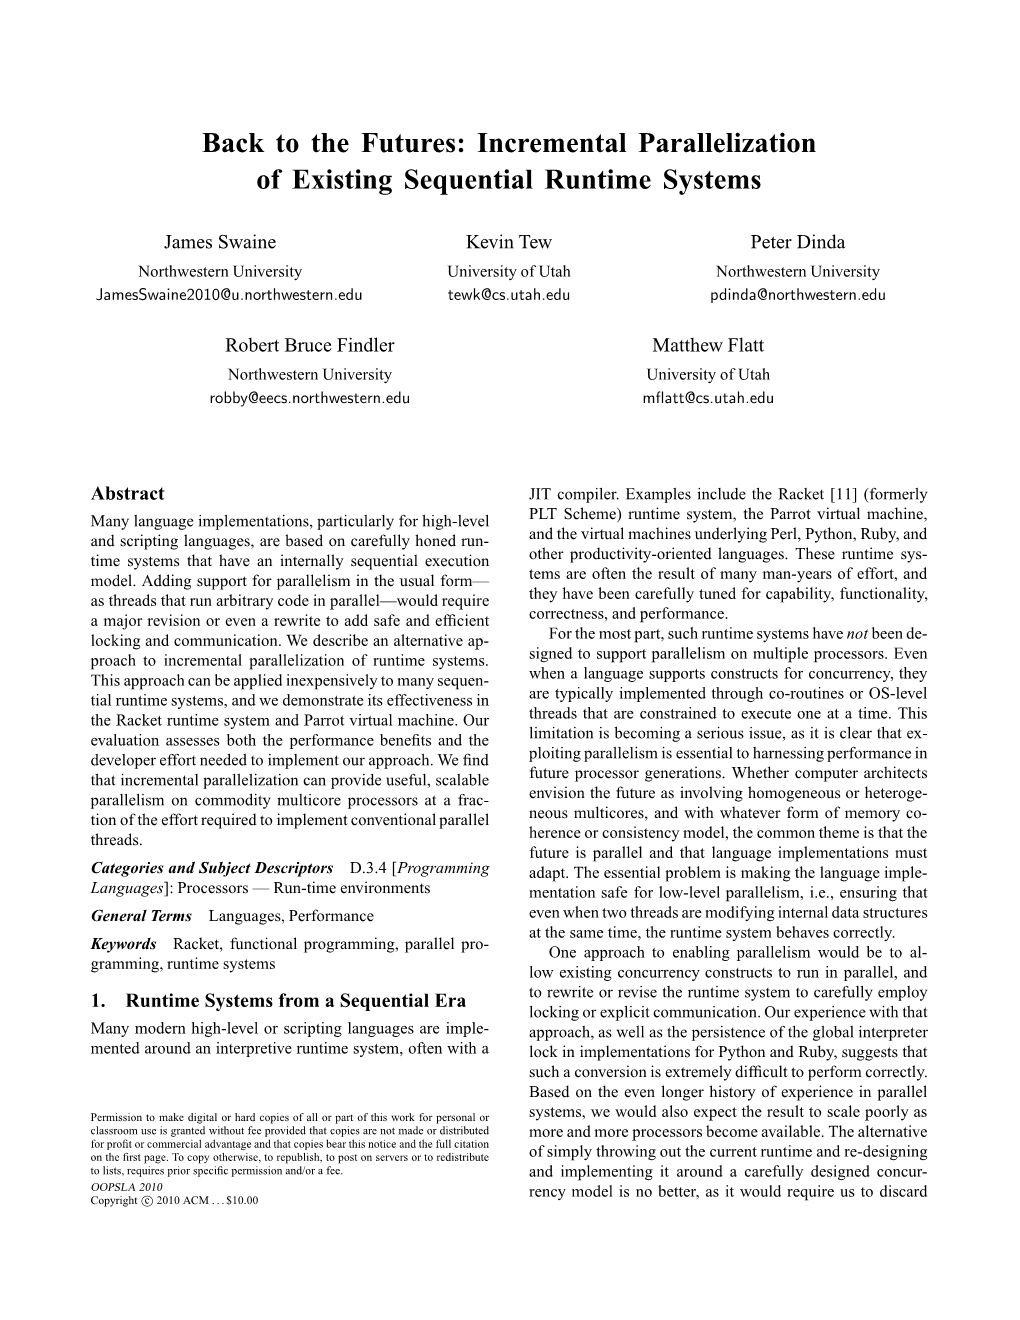 Incremental Parallelization of Existing Sequential Runtime Systems